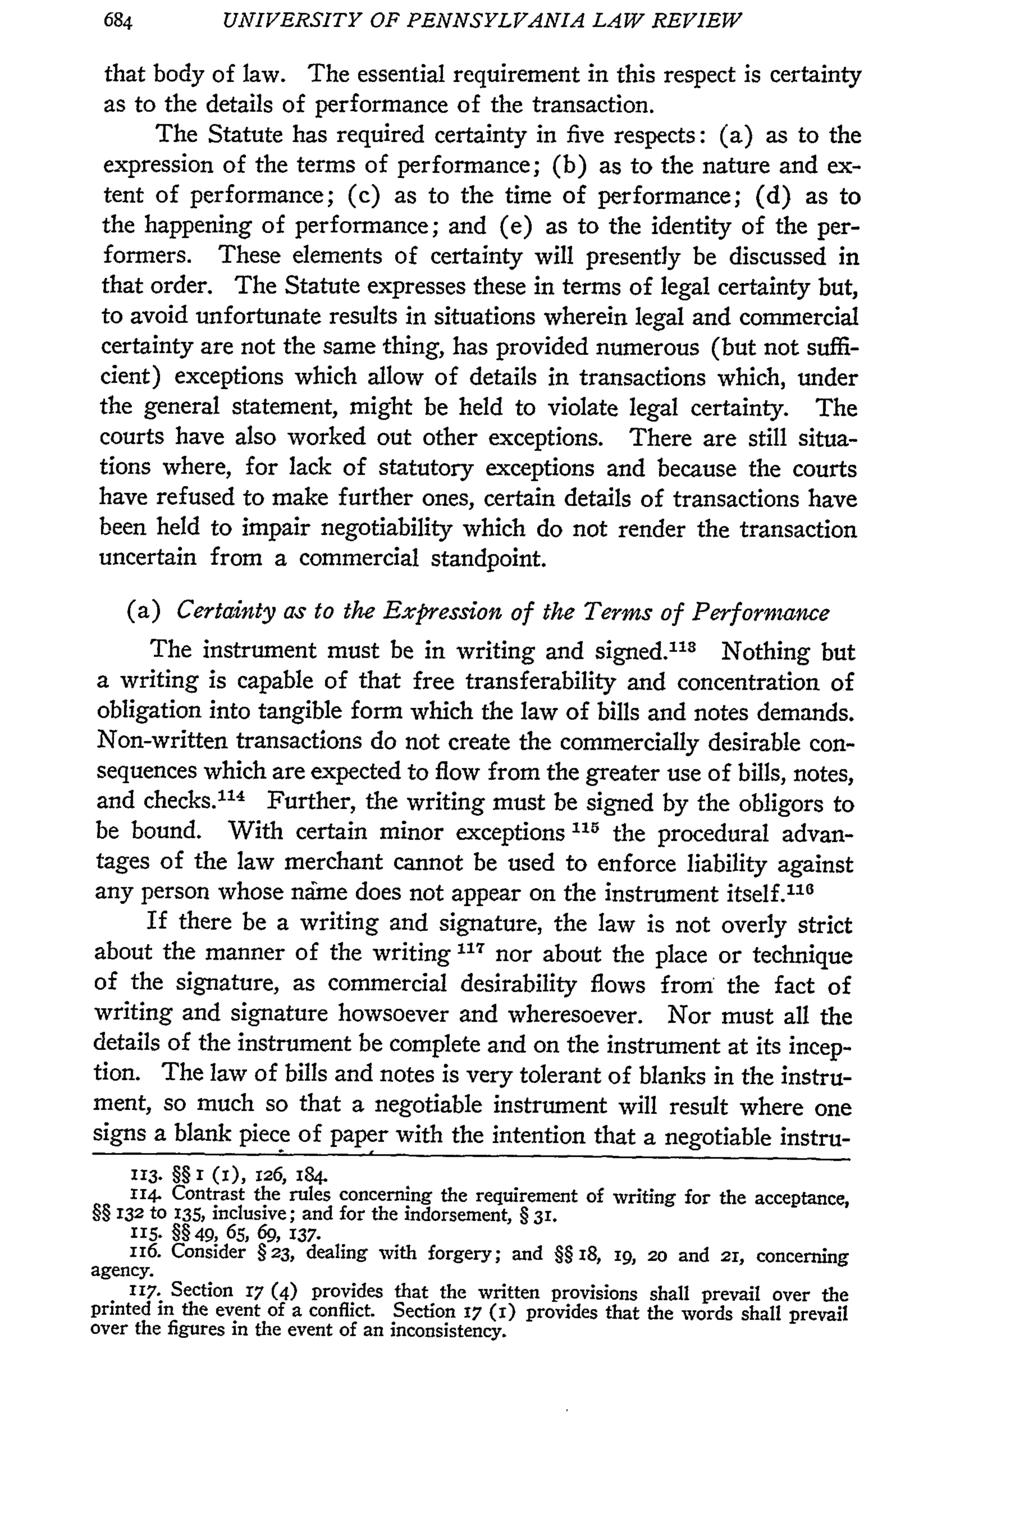 684 UNIVERSITY OF PENNSYLVANIA LAW REVIEW that body of law. The essential requirement in this respect is certainty as to the details of performance of the transaction.